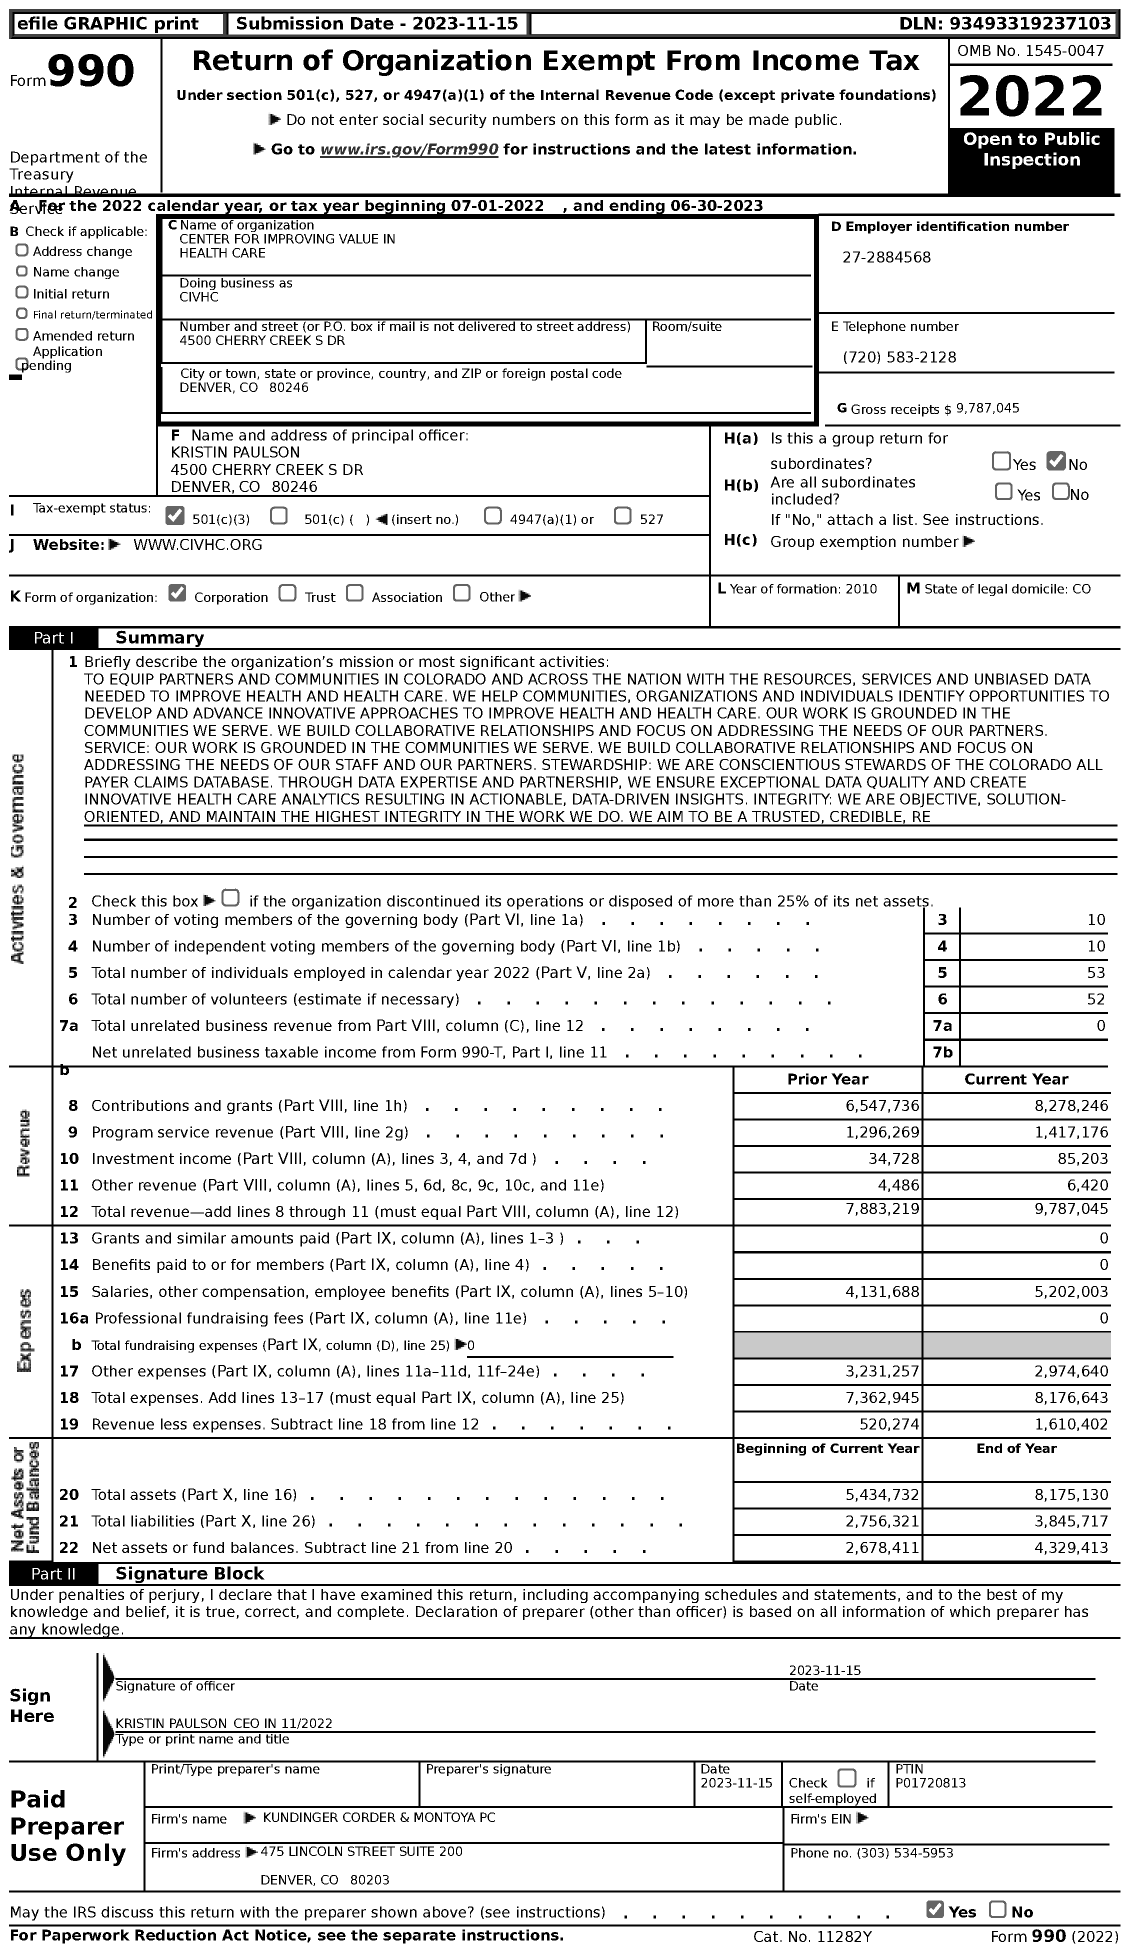 Image of first page of 2022 Form 990 for Center for Improving Value in Health Care (CIVHC)